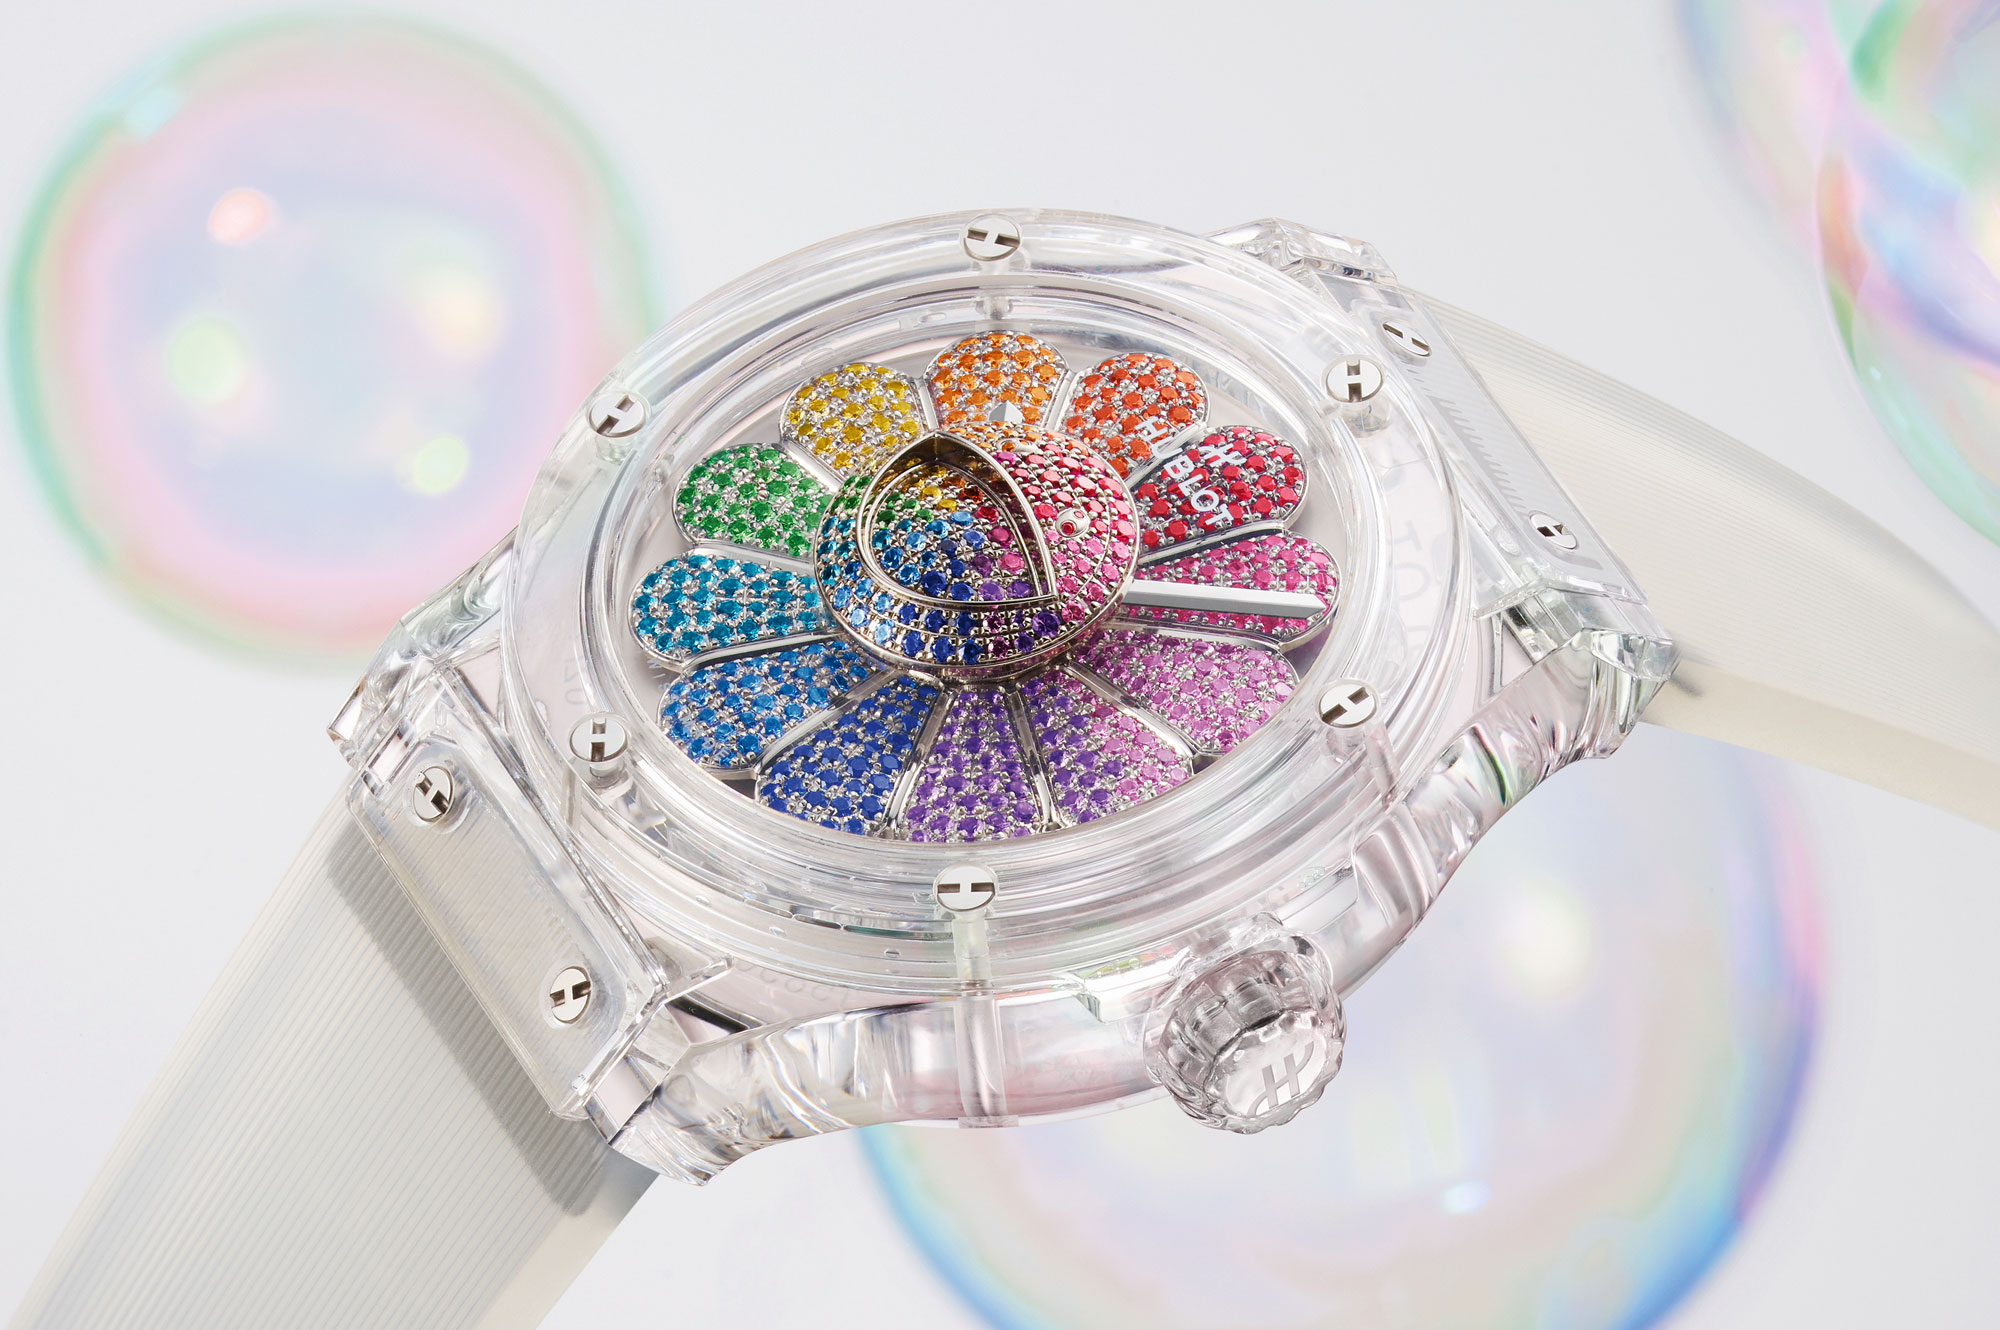 Takashi Murakami Collaborates With Hublot on Watch Featuring Smiling Flower  Design